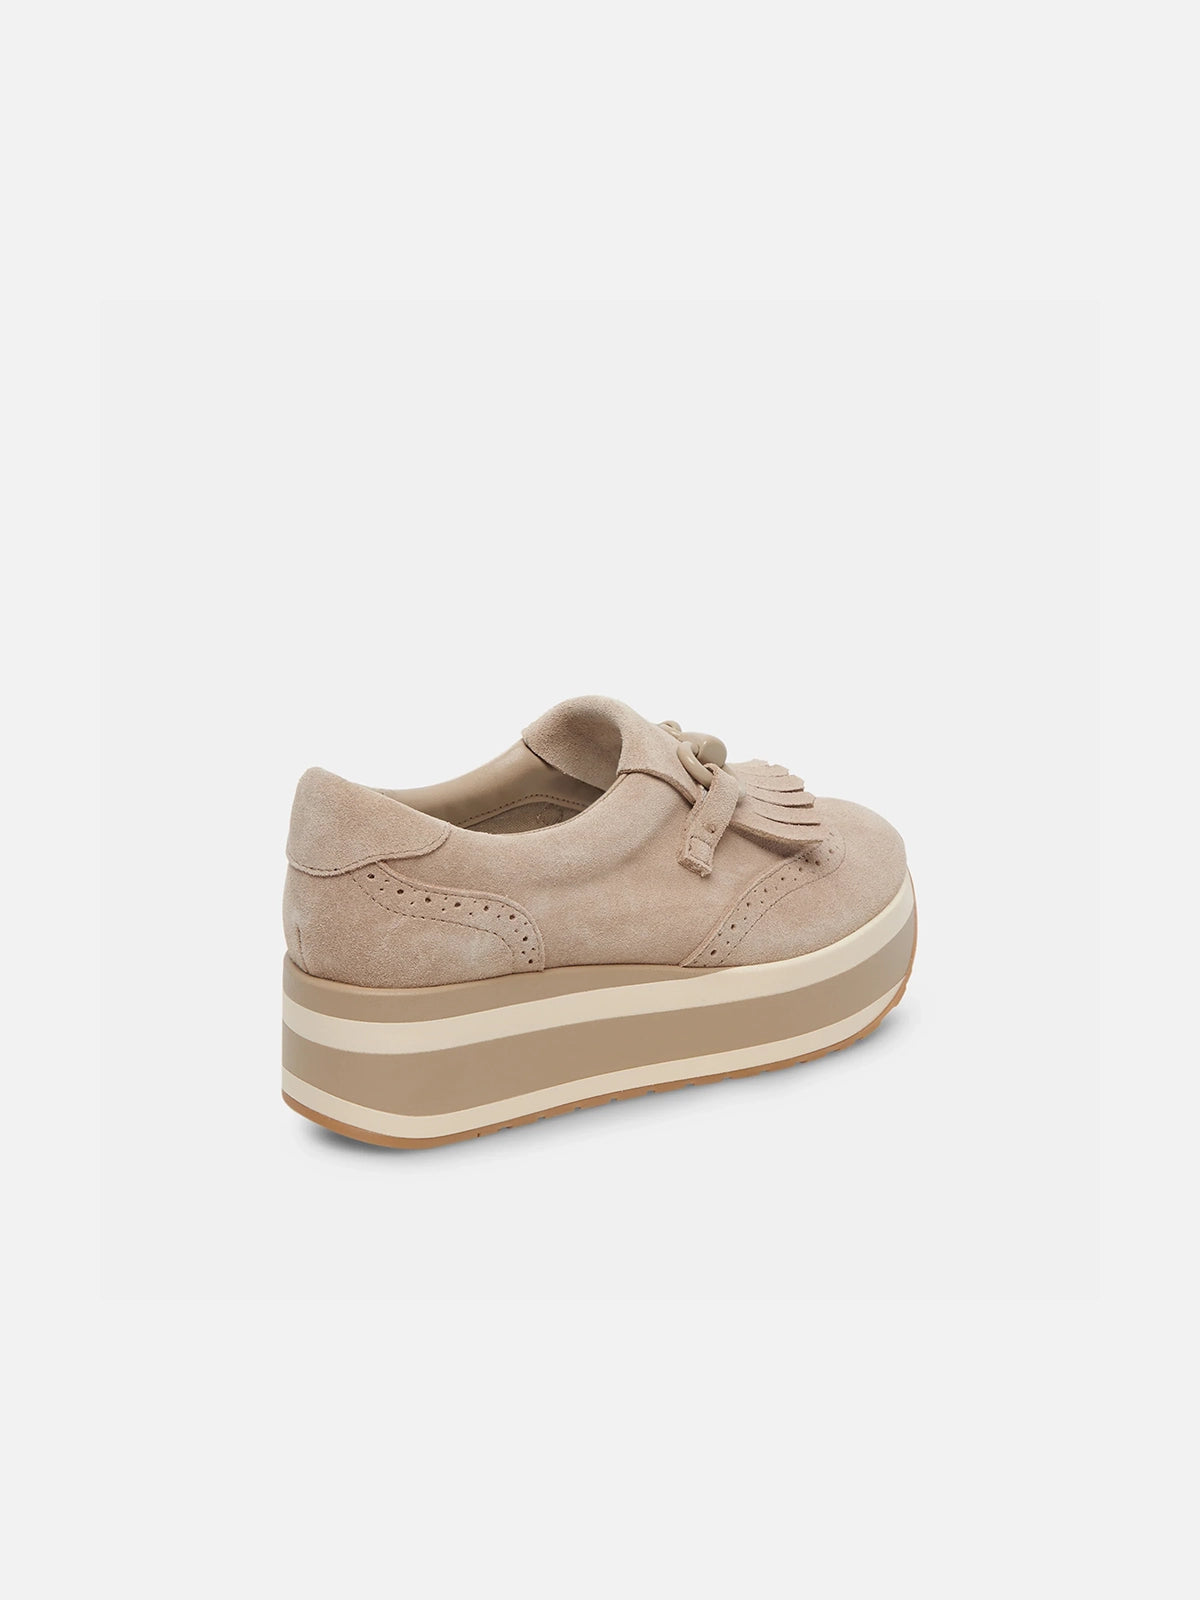 dolce vita jhax platform sneakers in almond suede